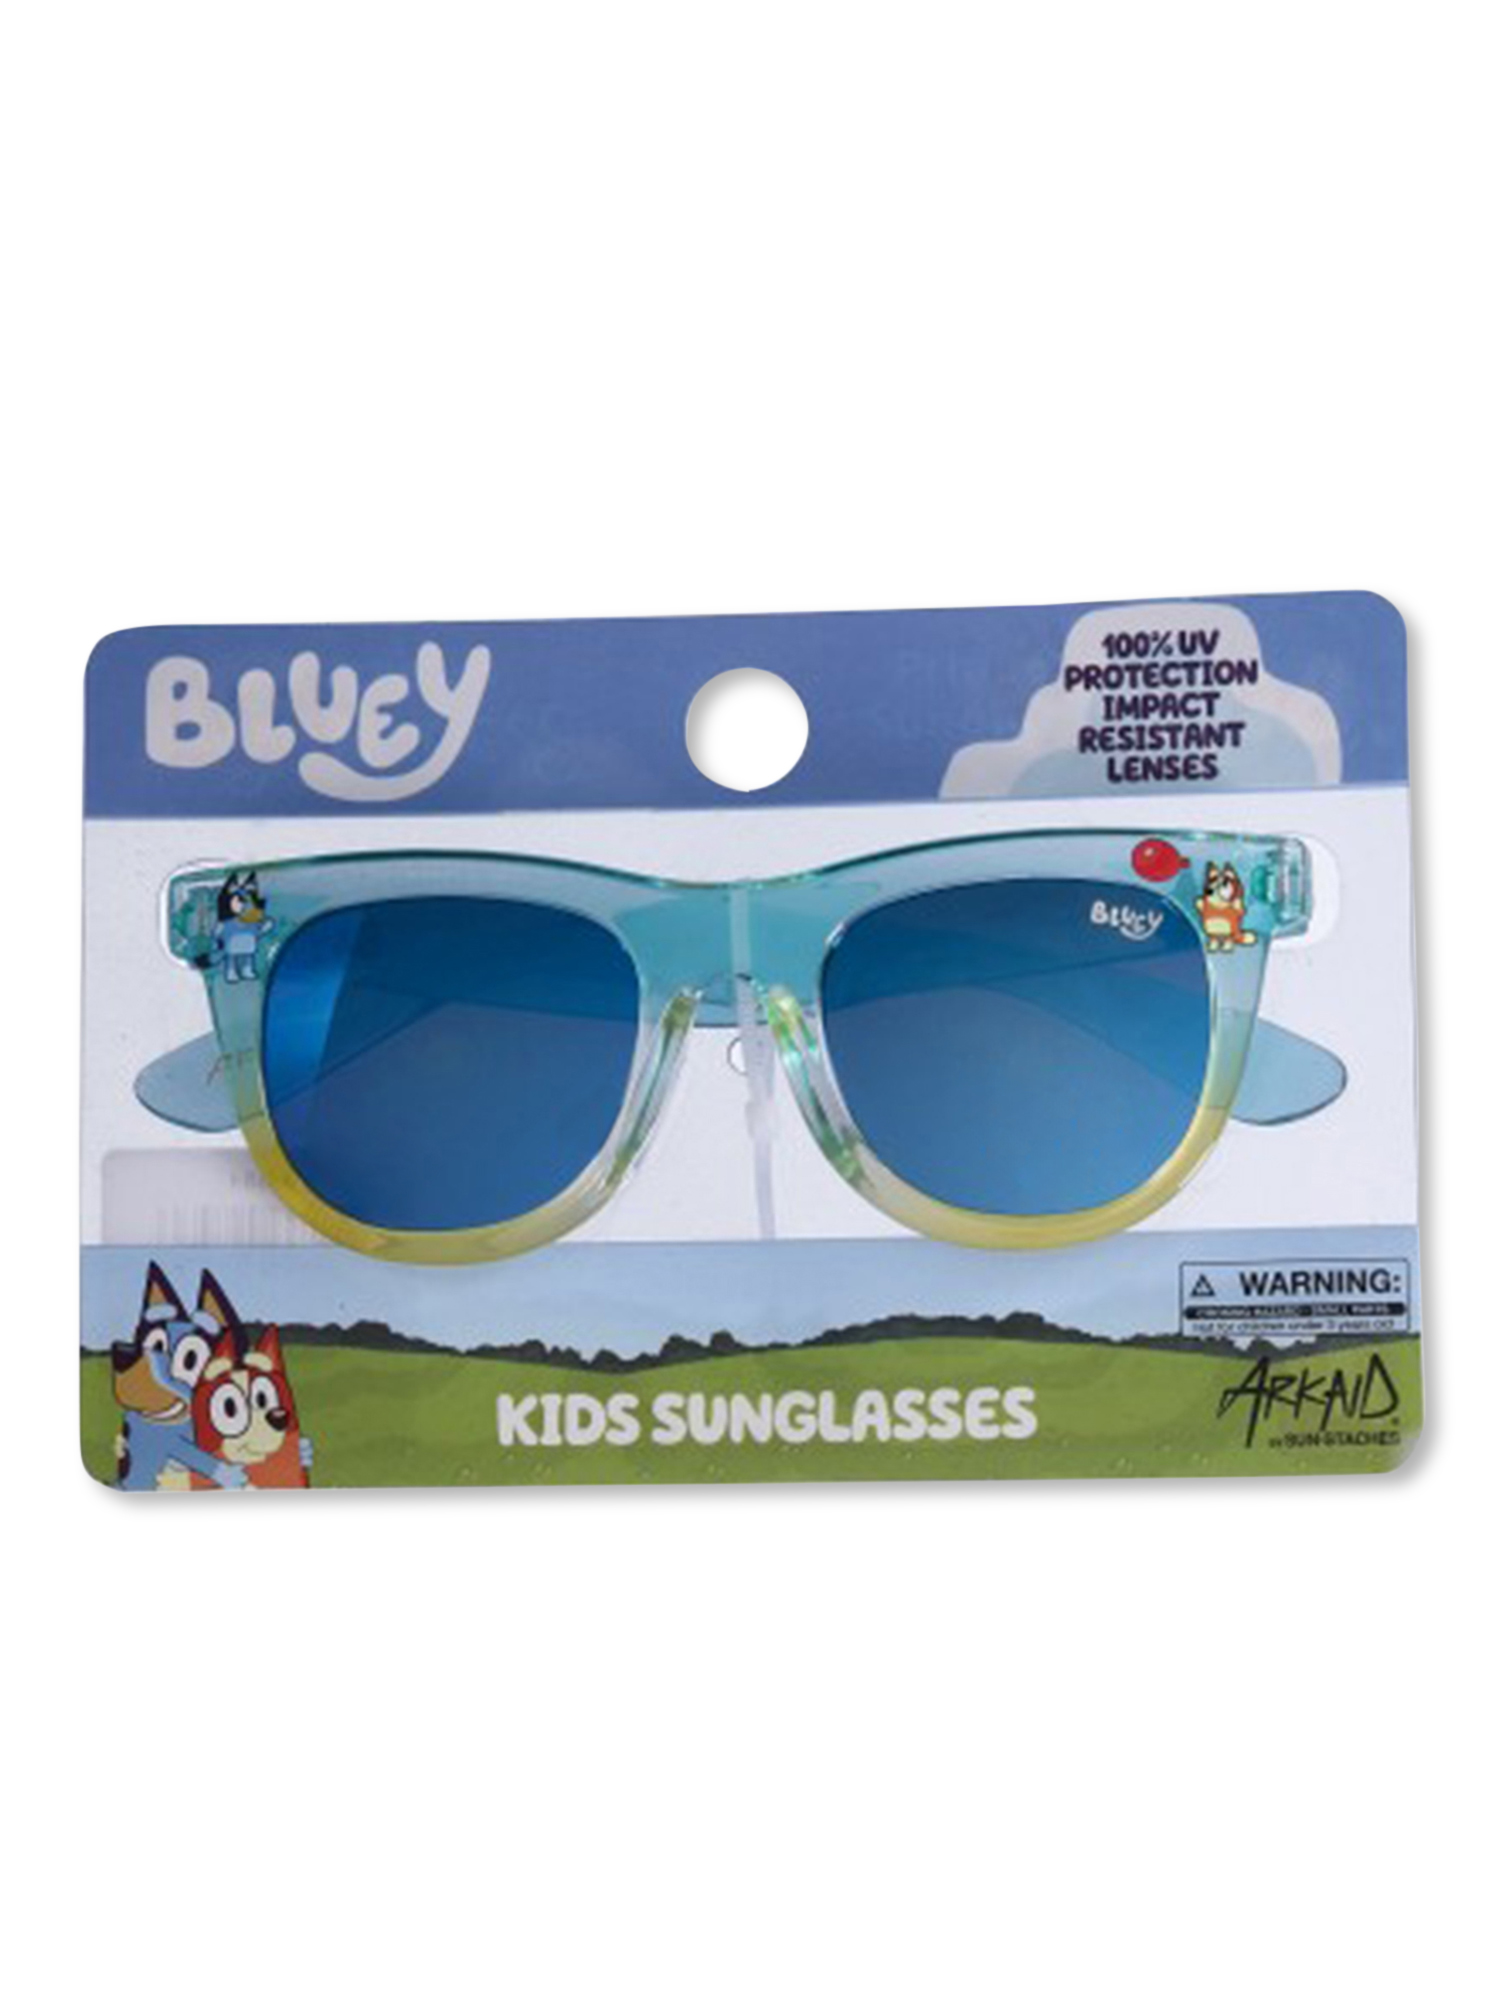 Bluey Kids Classic Sunglasses with UV Protection Blue - image 2 of 4